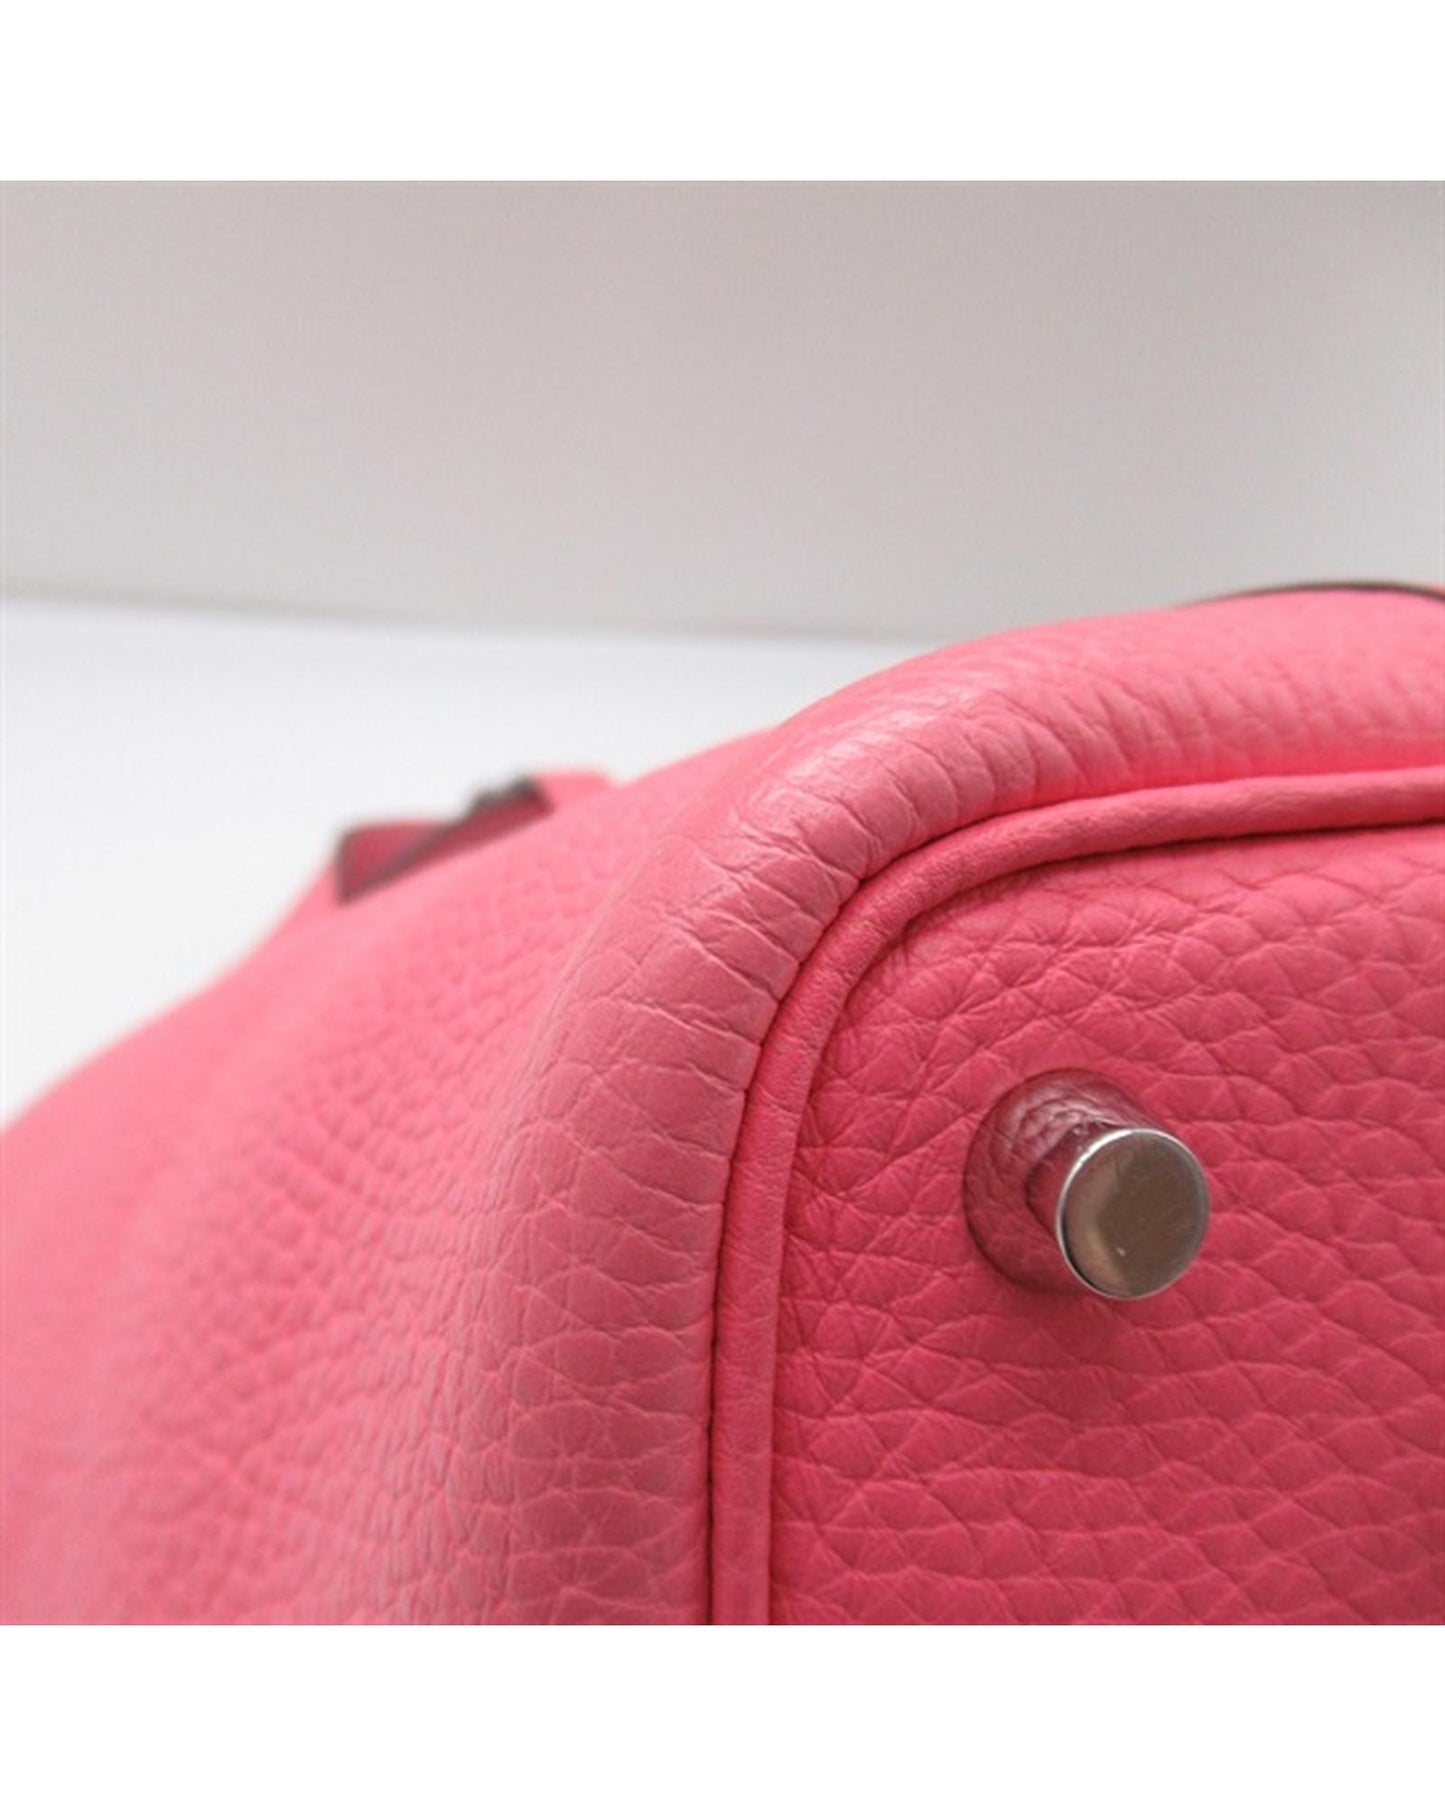 Hermes Women's Pink Leather Picotin Lock Bag in Excellent Condition in Pink